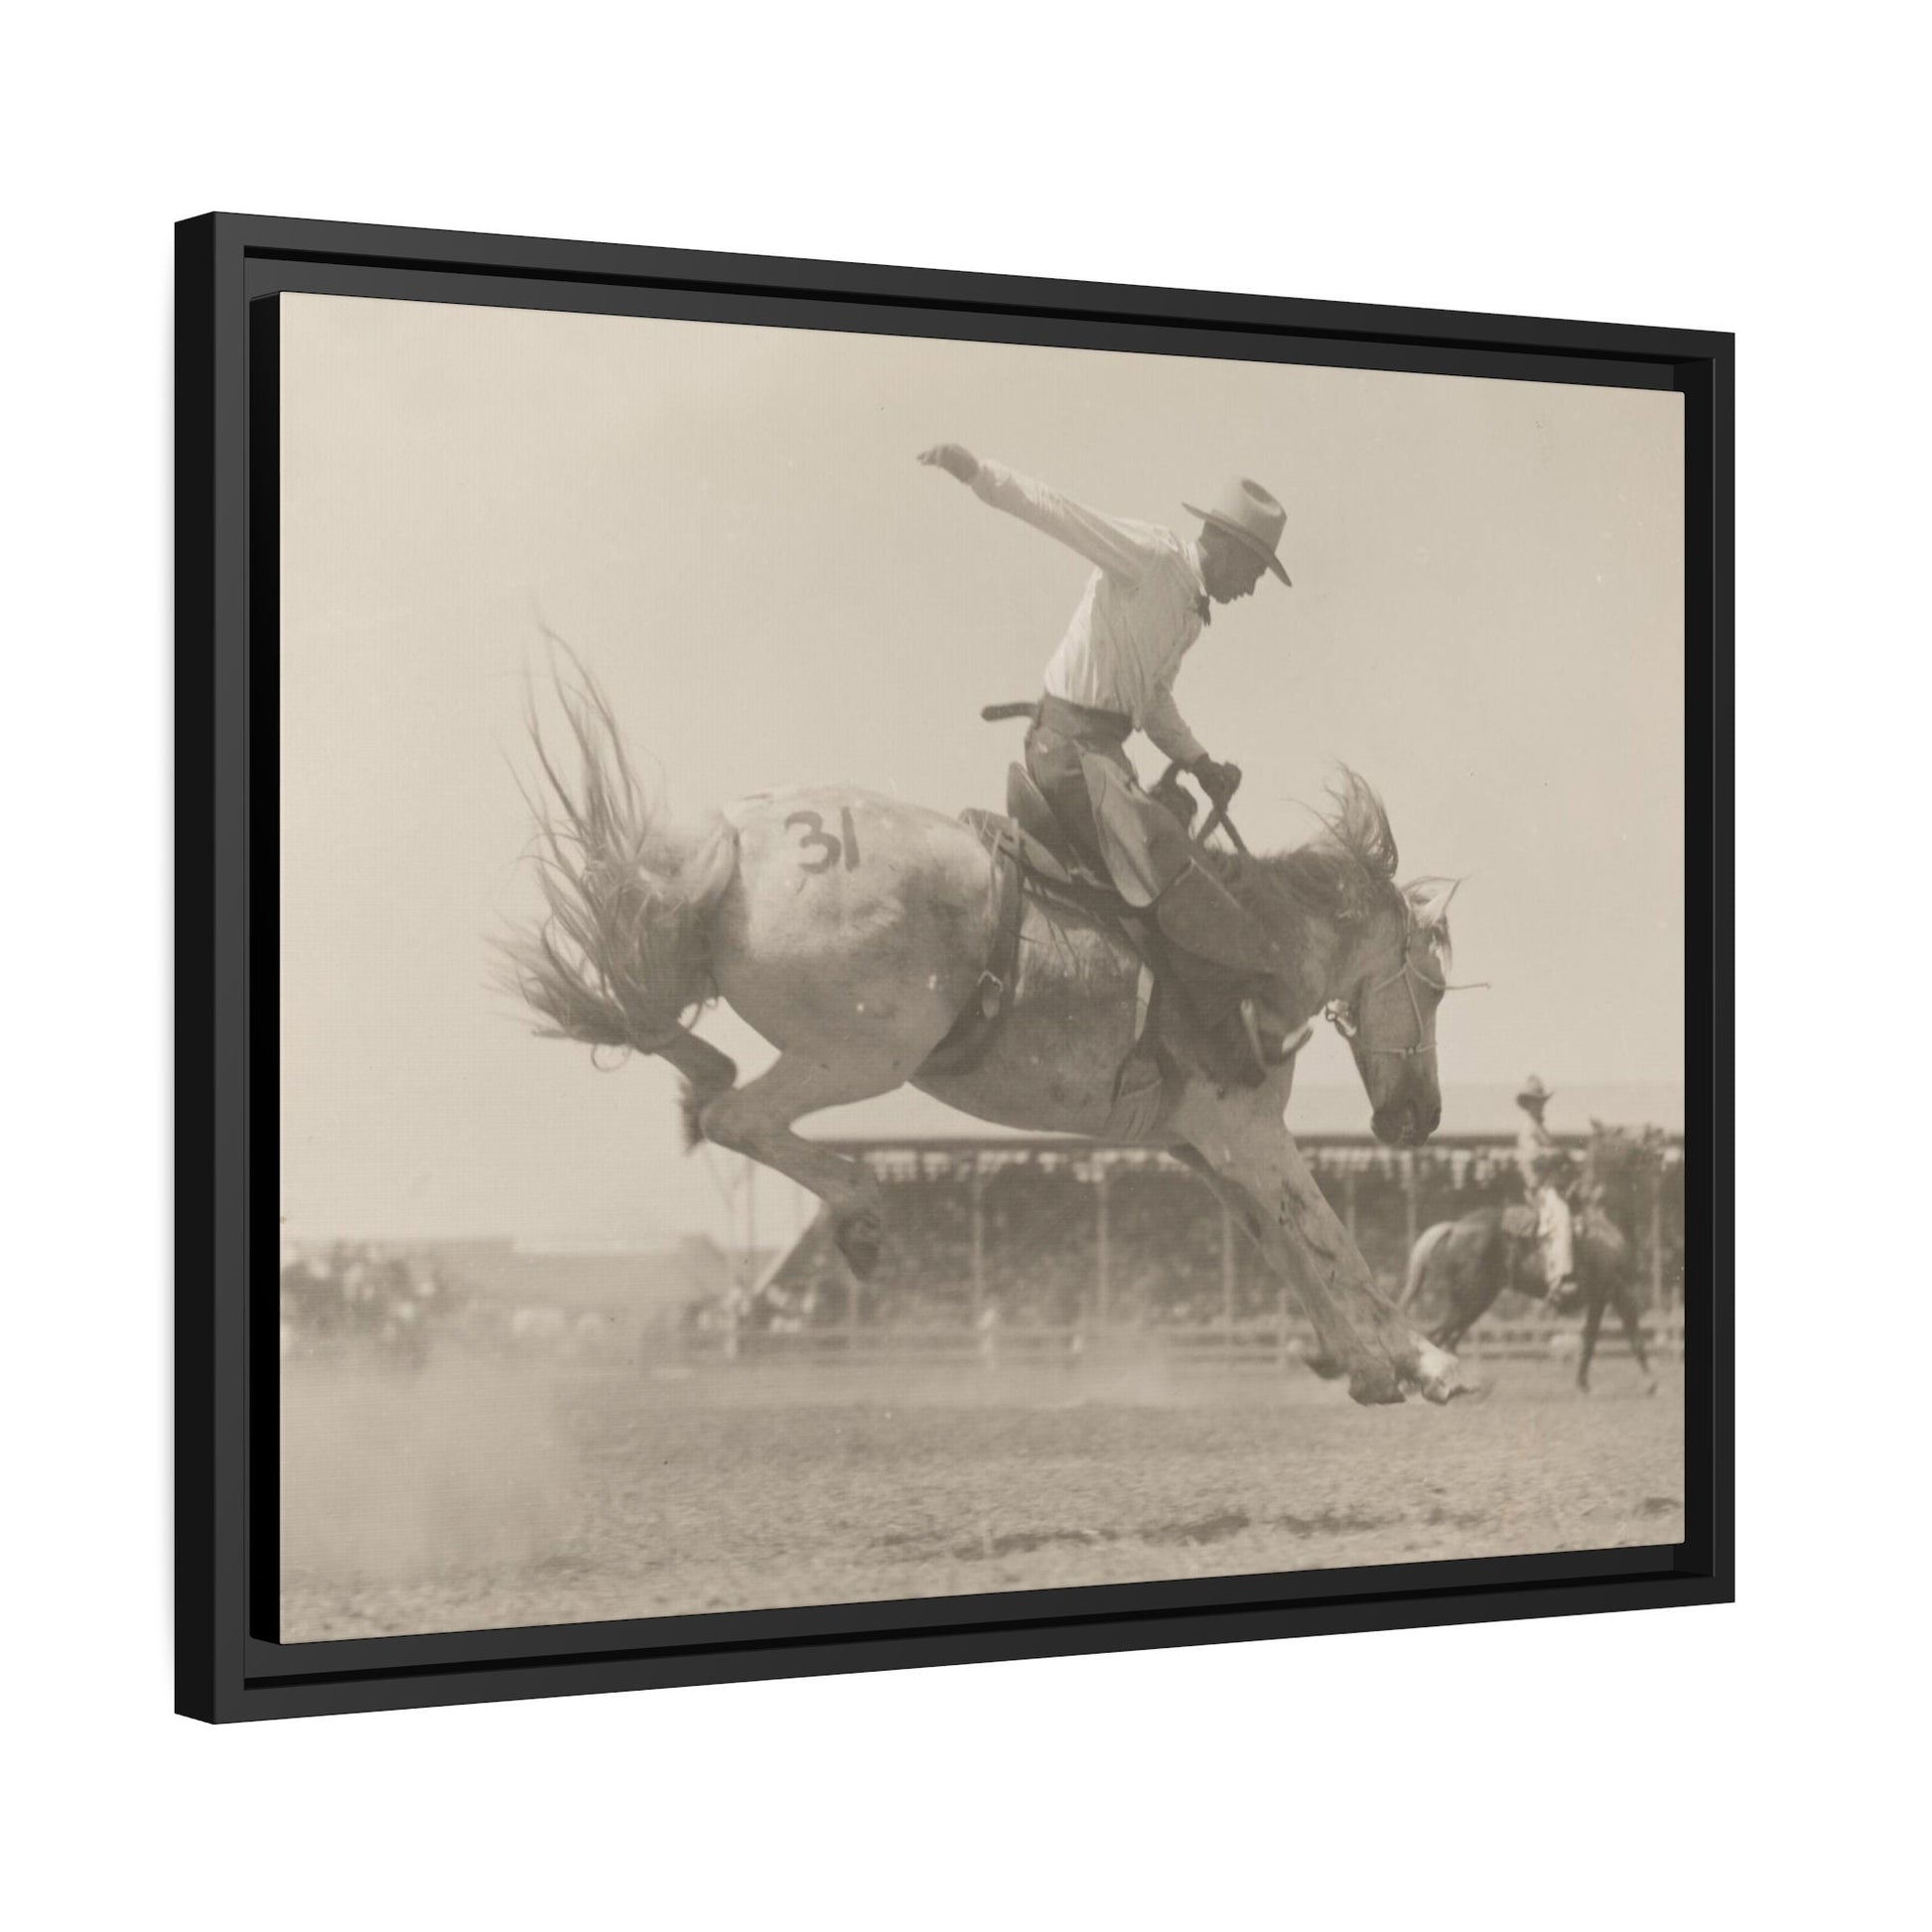 Cowboy Bronc Riding Rodeo Photo Black Framed Canvas Vintage Wall Art Old Time Retro Photography of Nebraska Bucking Bronco Burwell Rodeo